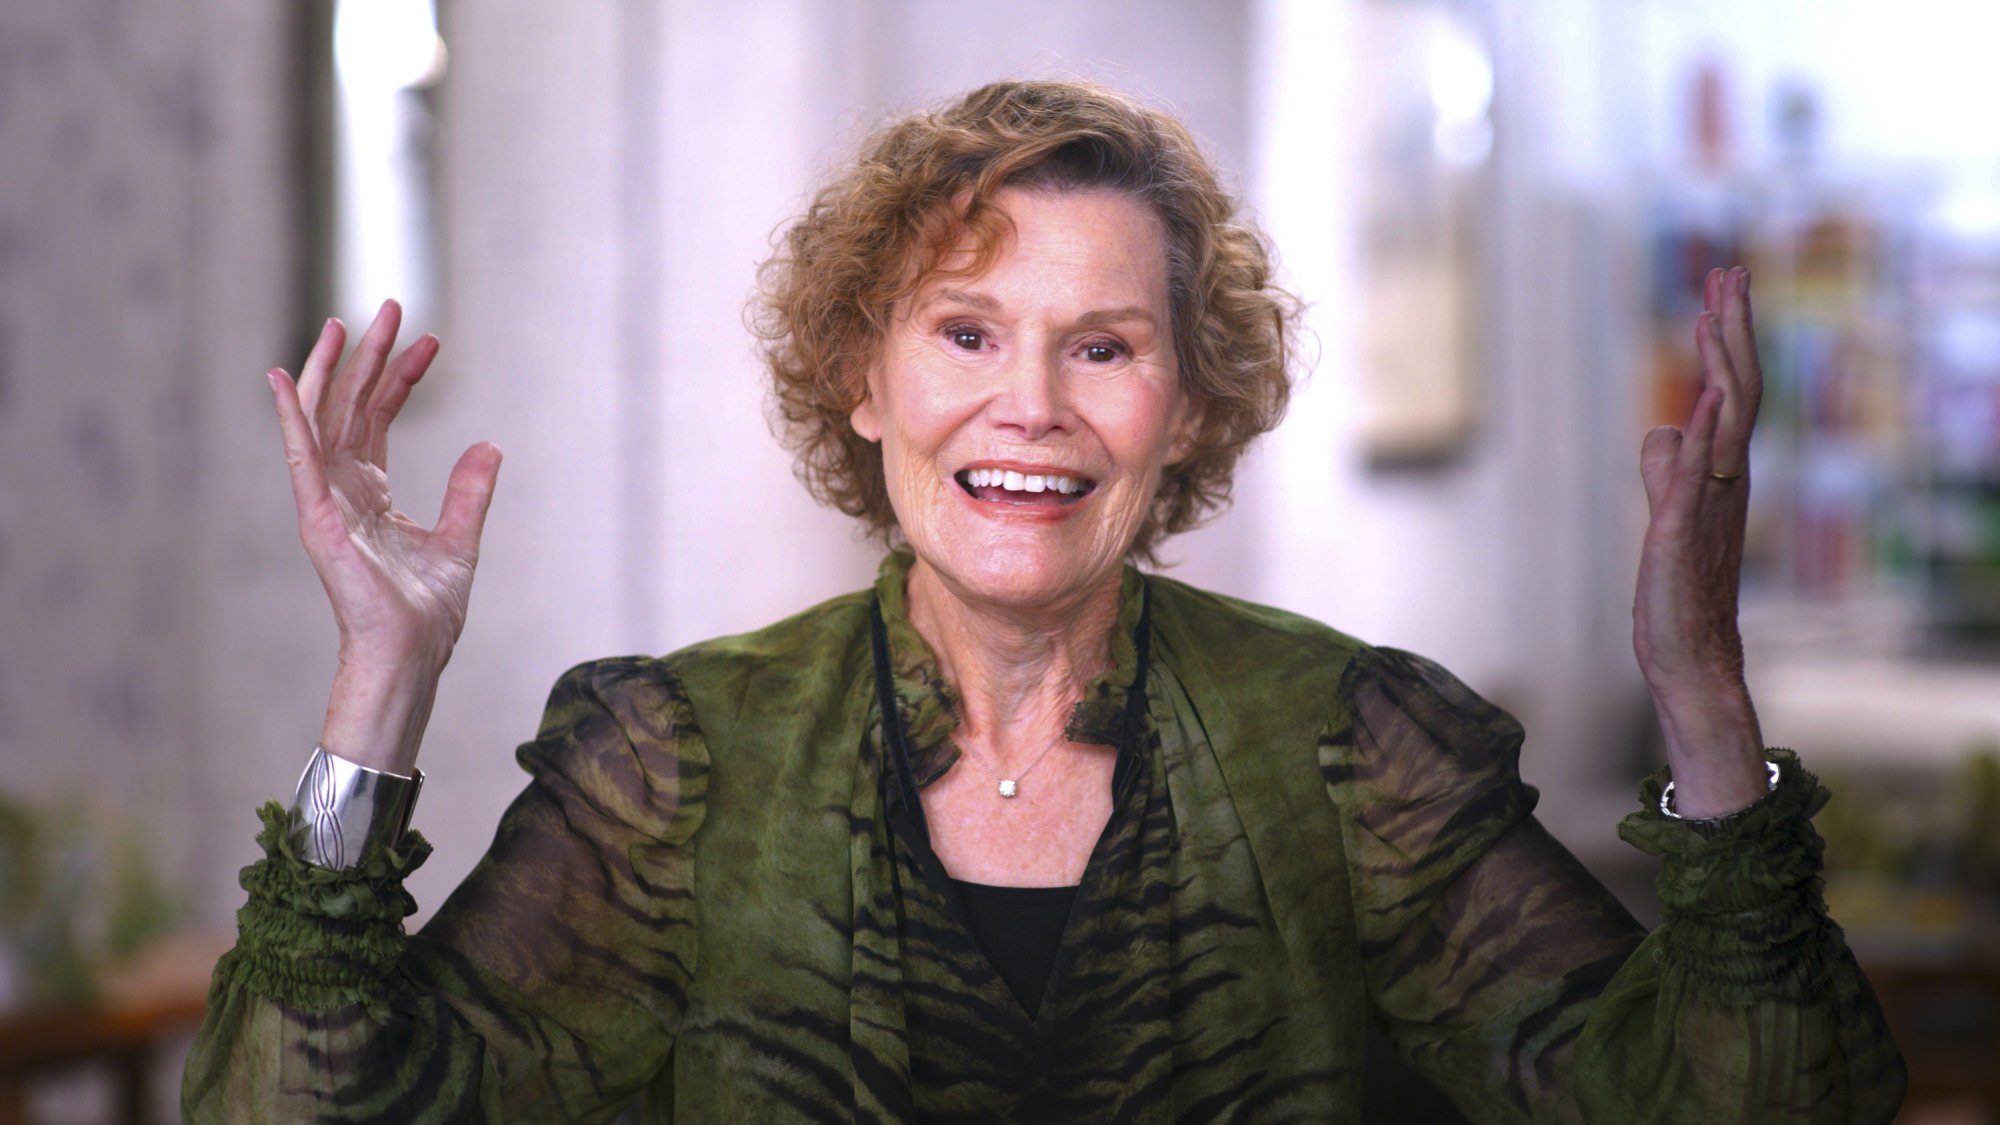 Judy Blume in a green blouse.